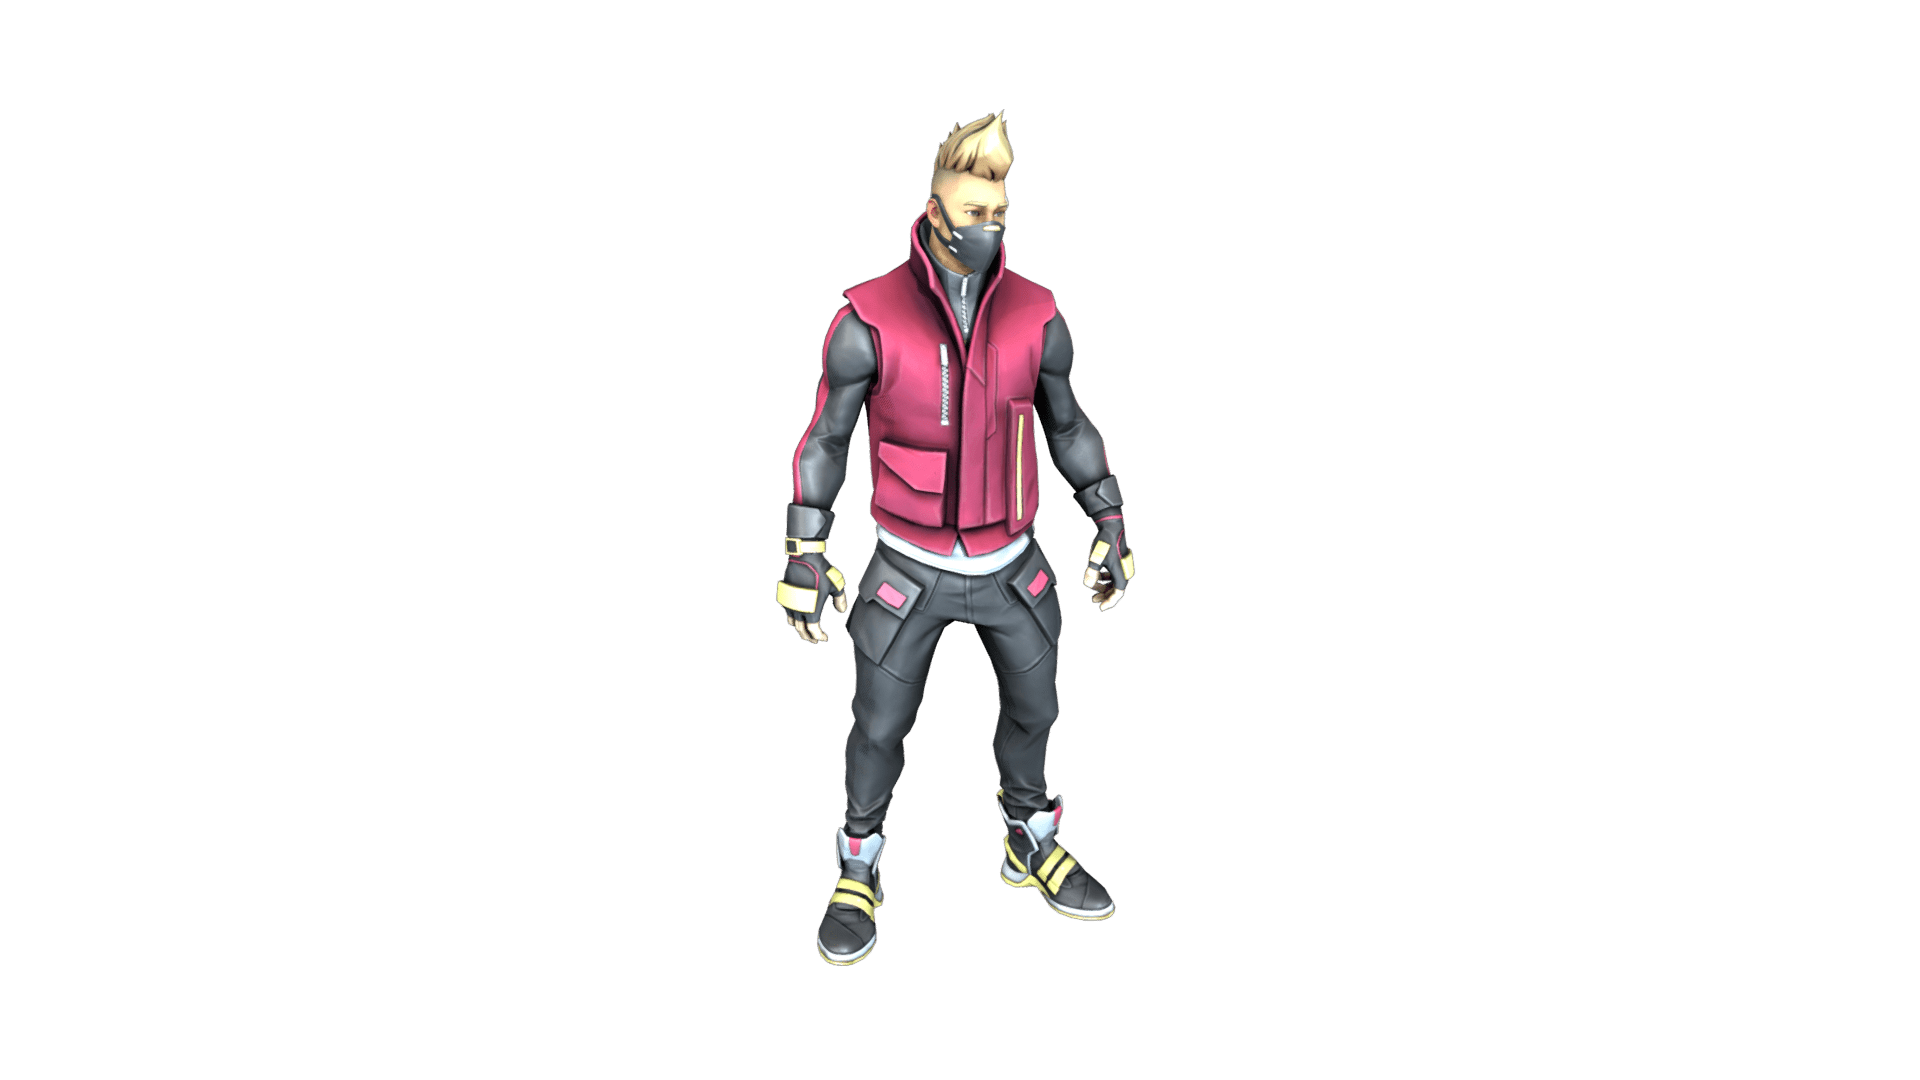 Drift Fortnite Outfit Skin How to Upgrade, Stages, Details